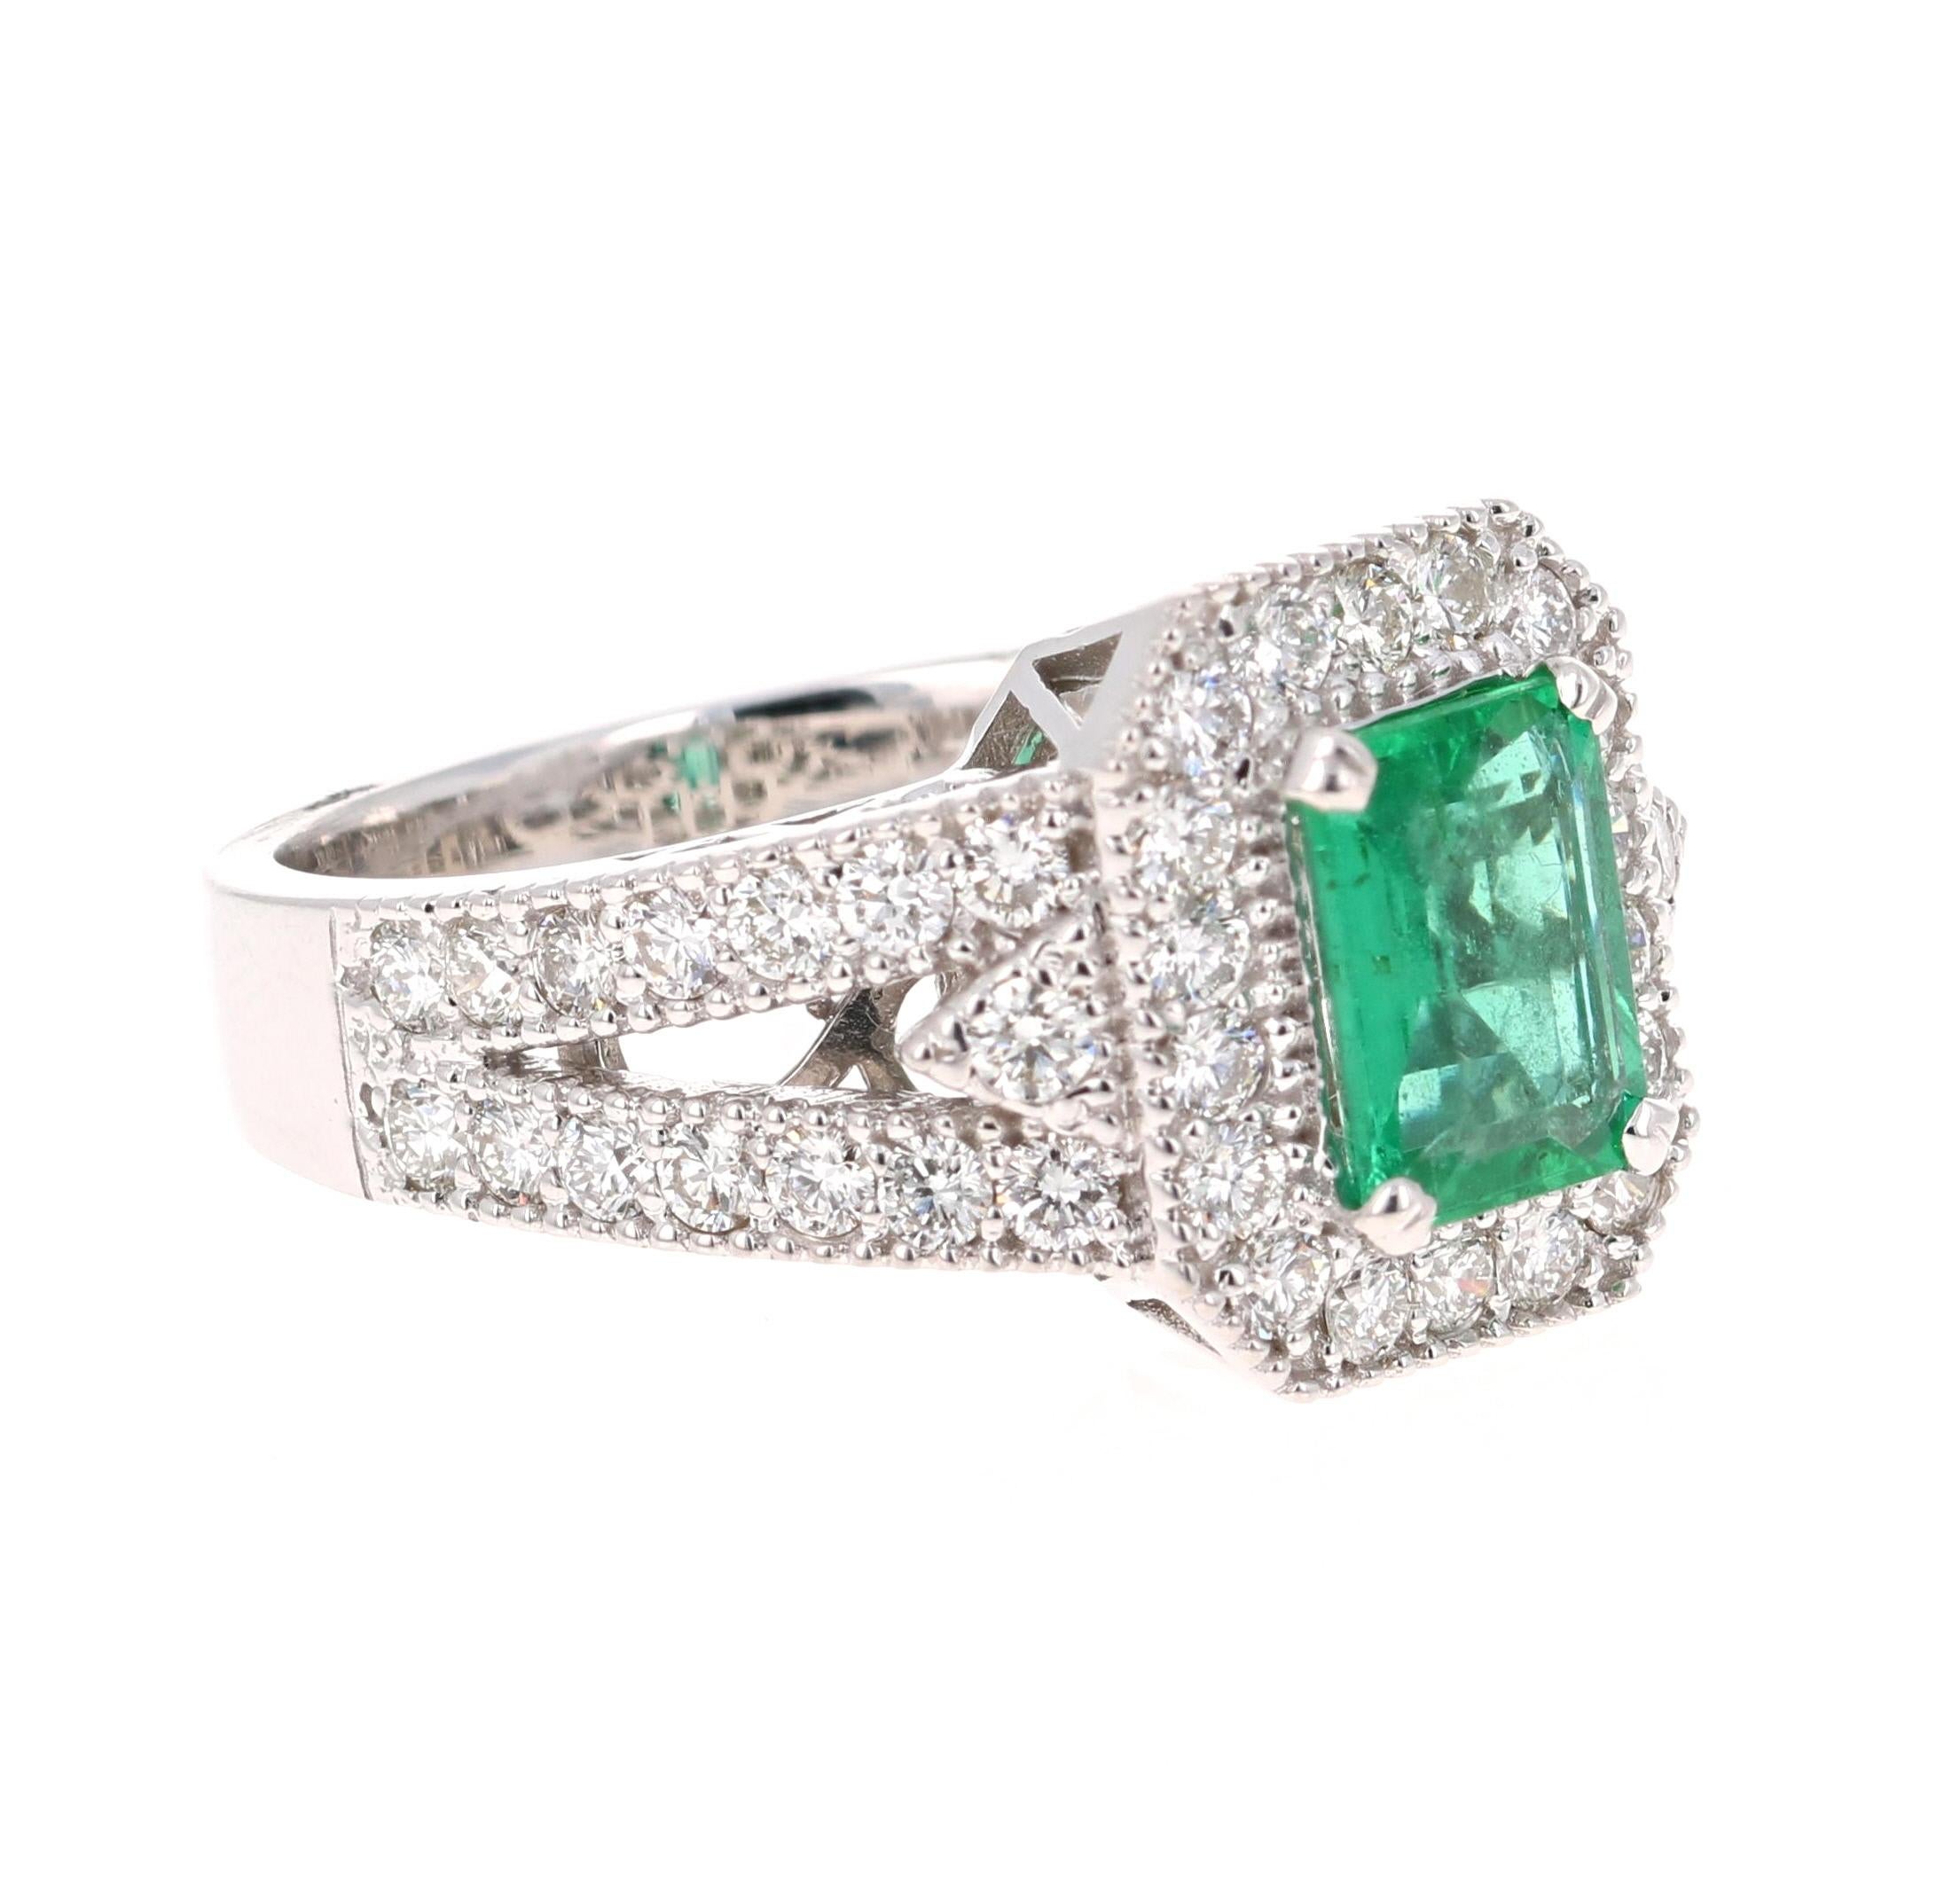 Stunning Vintage Inspired Emerald Cut Emerald Diamond Ring! 

This Emerald ring is absolutely gorgeous. The center is an Emerald Cut Emerald which weighs 1.17 carats and measures in at 6mm x 8 mm. The Emerald is GIA Certified, GIA Cert Number: